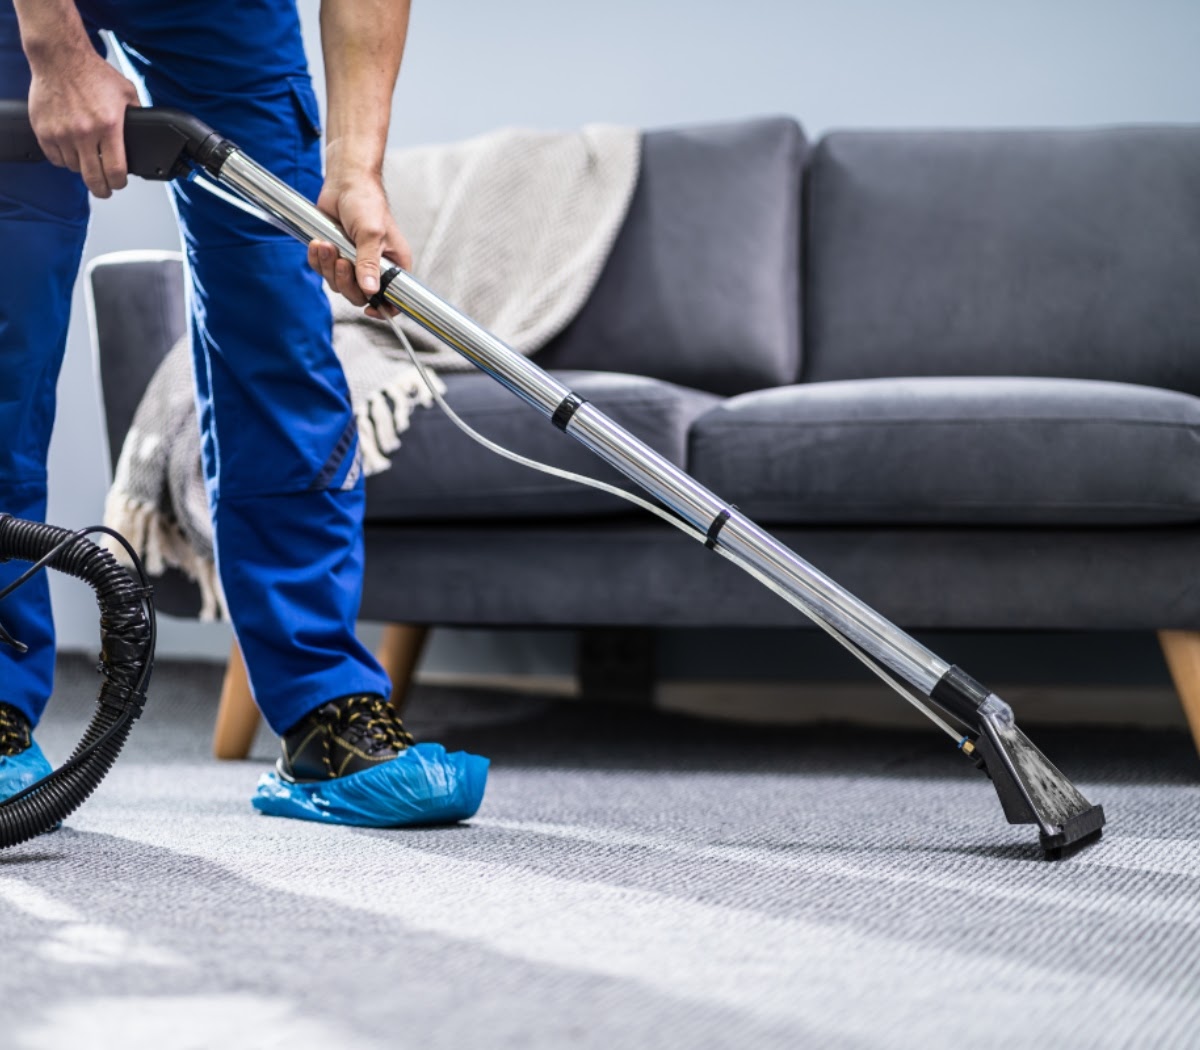 5 carpet cleaning marketing ideas to reach the right people.